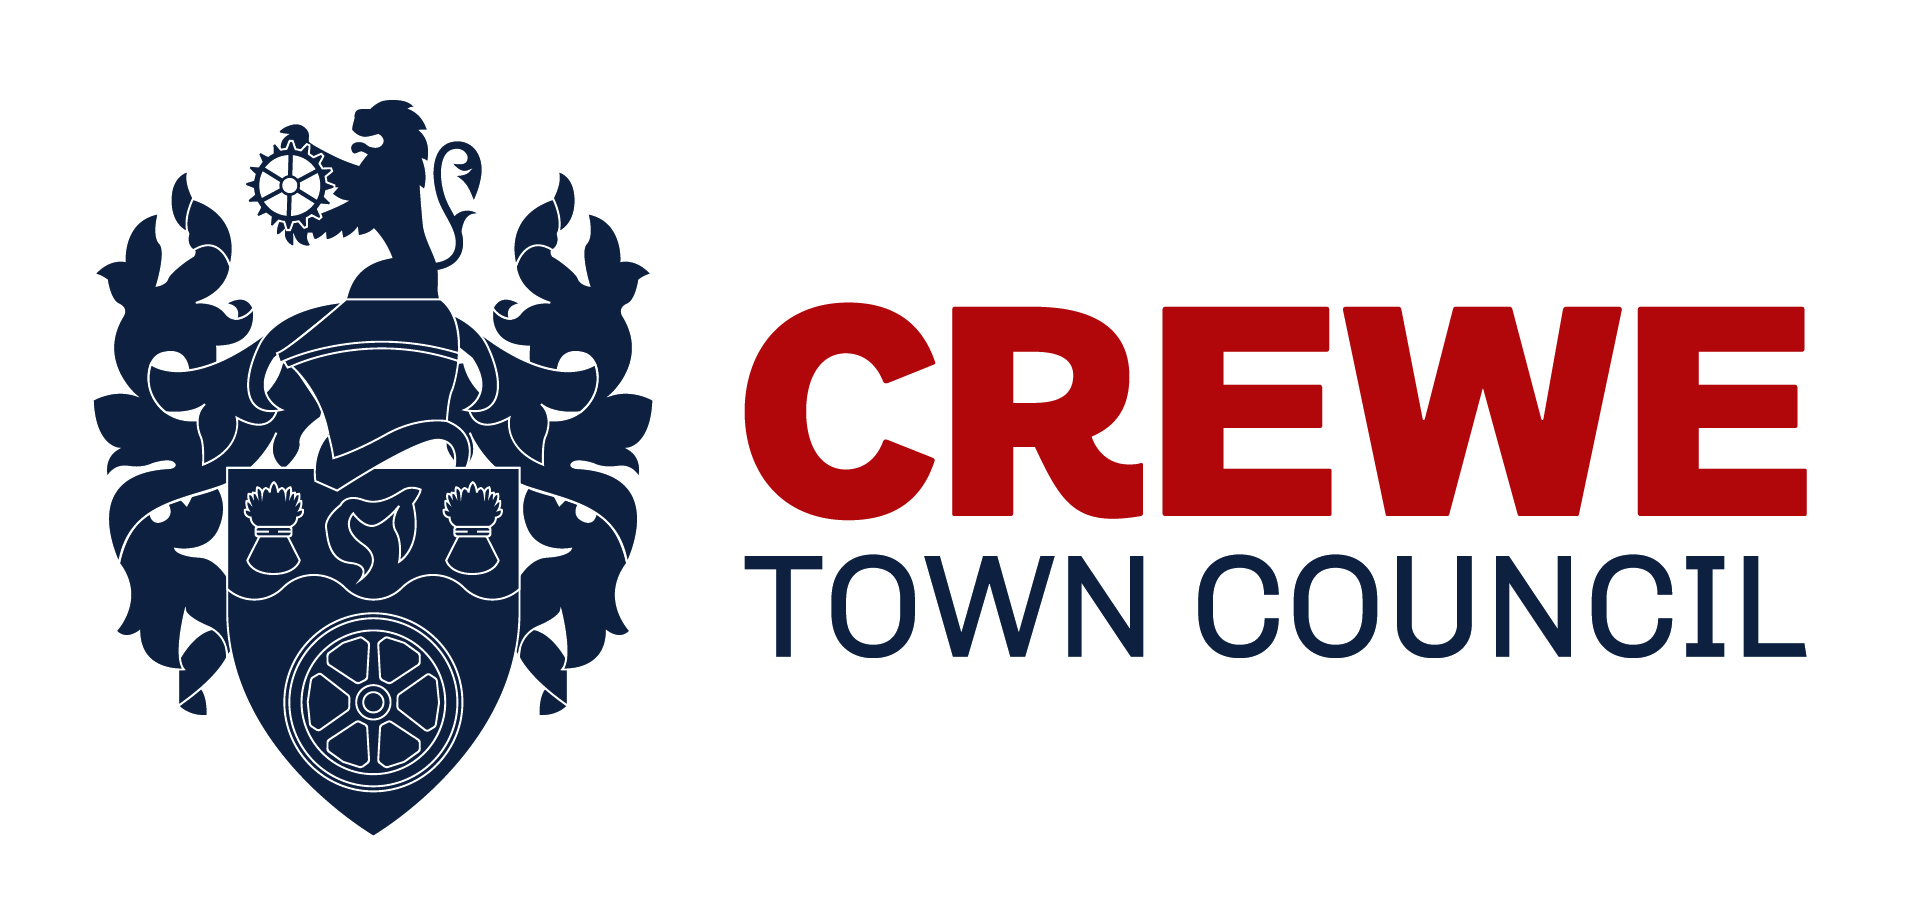 Crewe Town Council logo white background